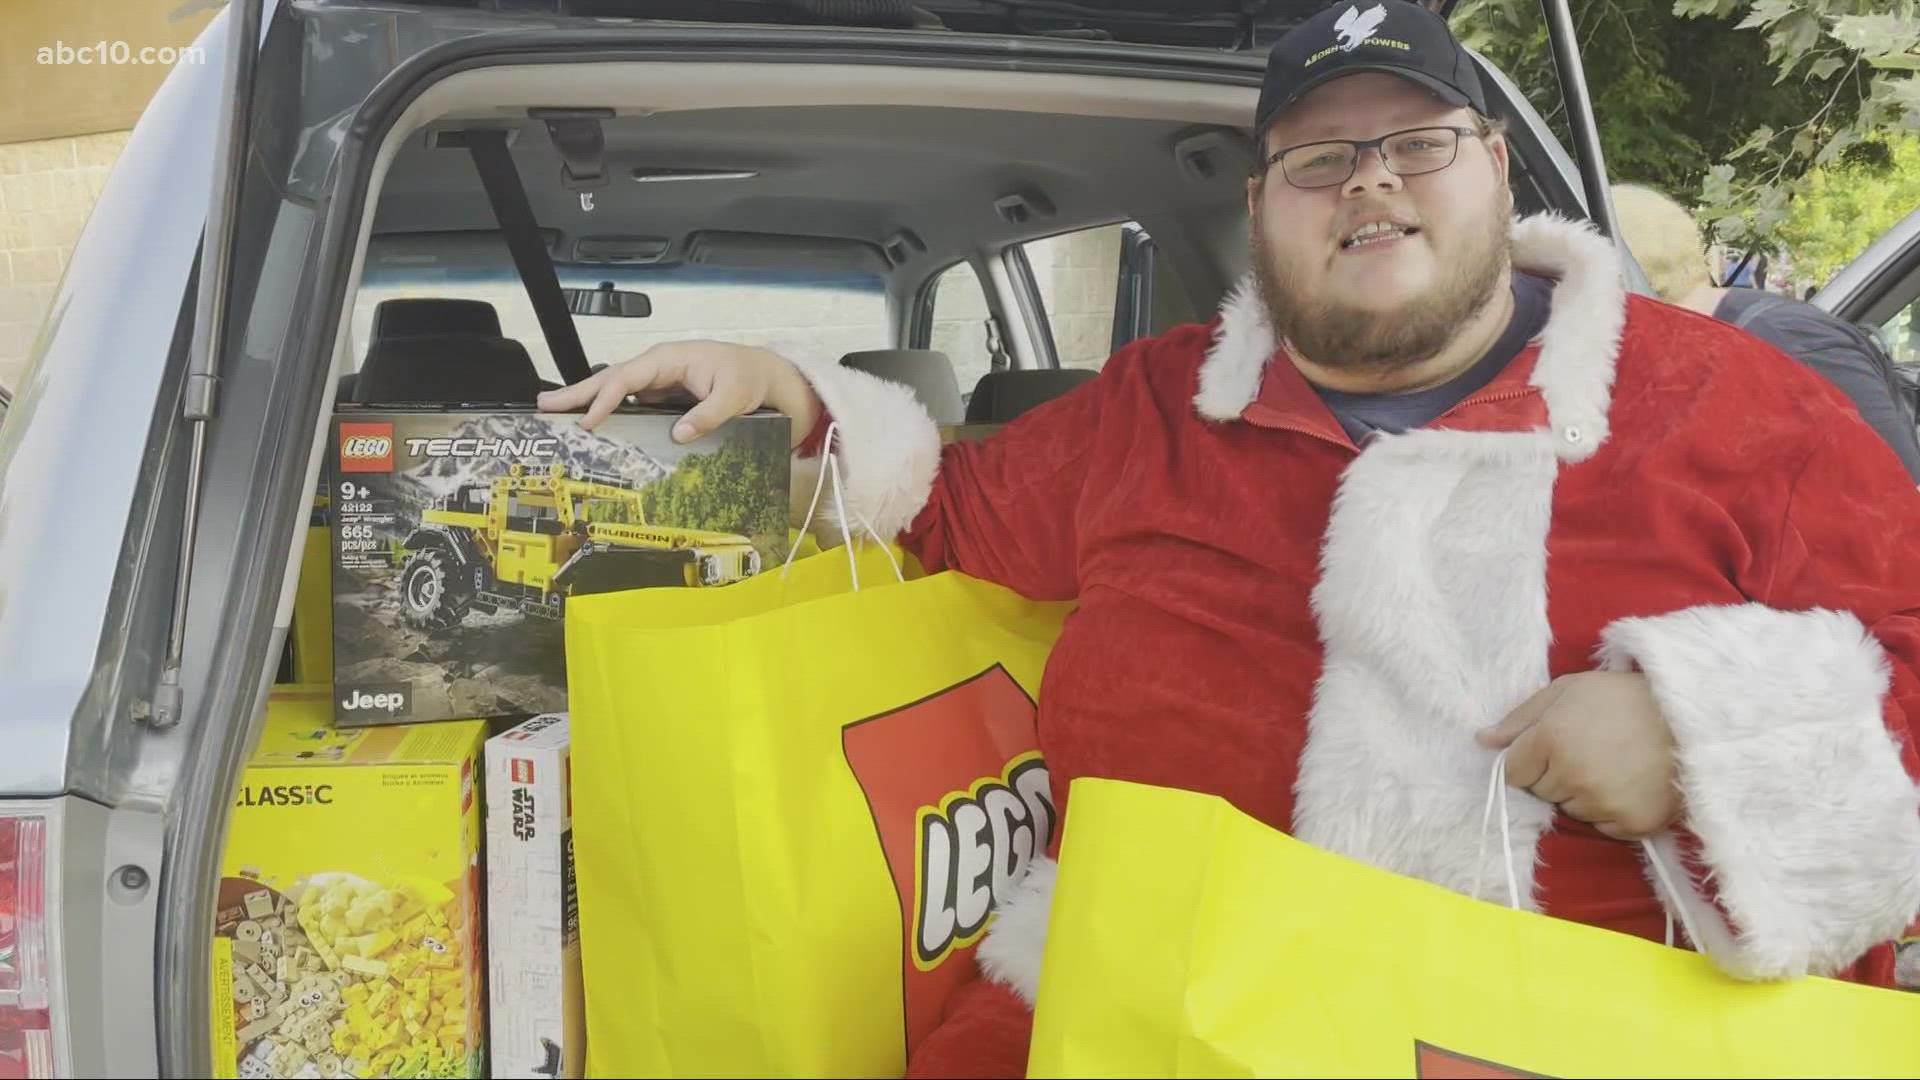 With a backlog of thousands of dollars of Lego from his popular social media channels, Earle decided to go out and give them to any kids impacted by the Caldor Fire.